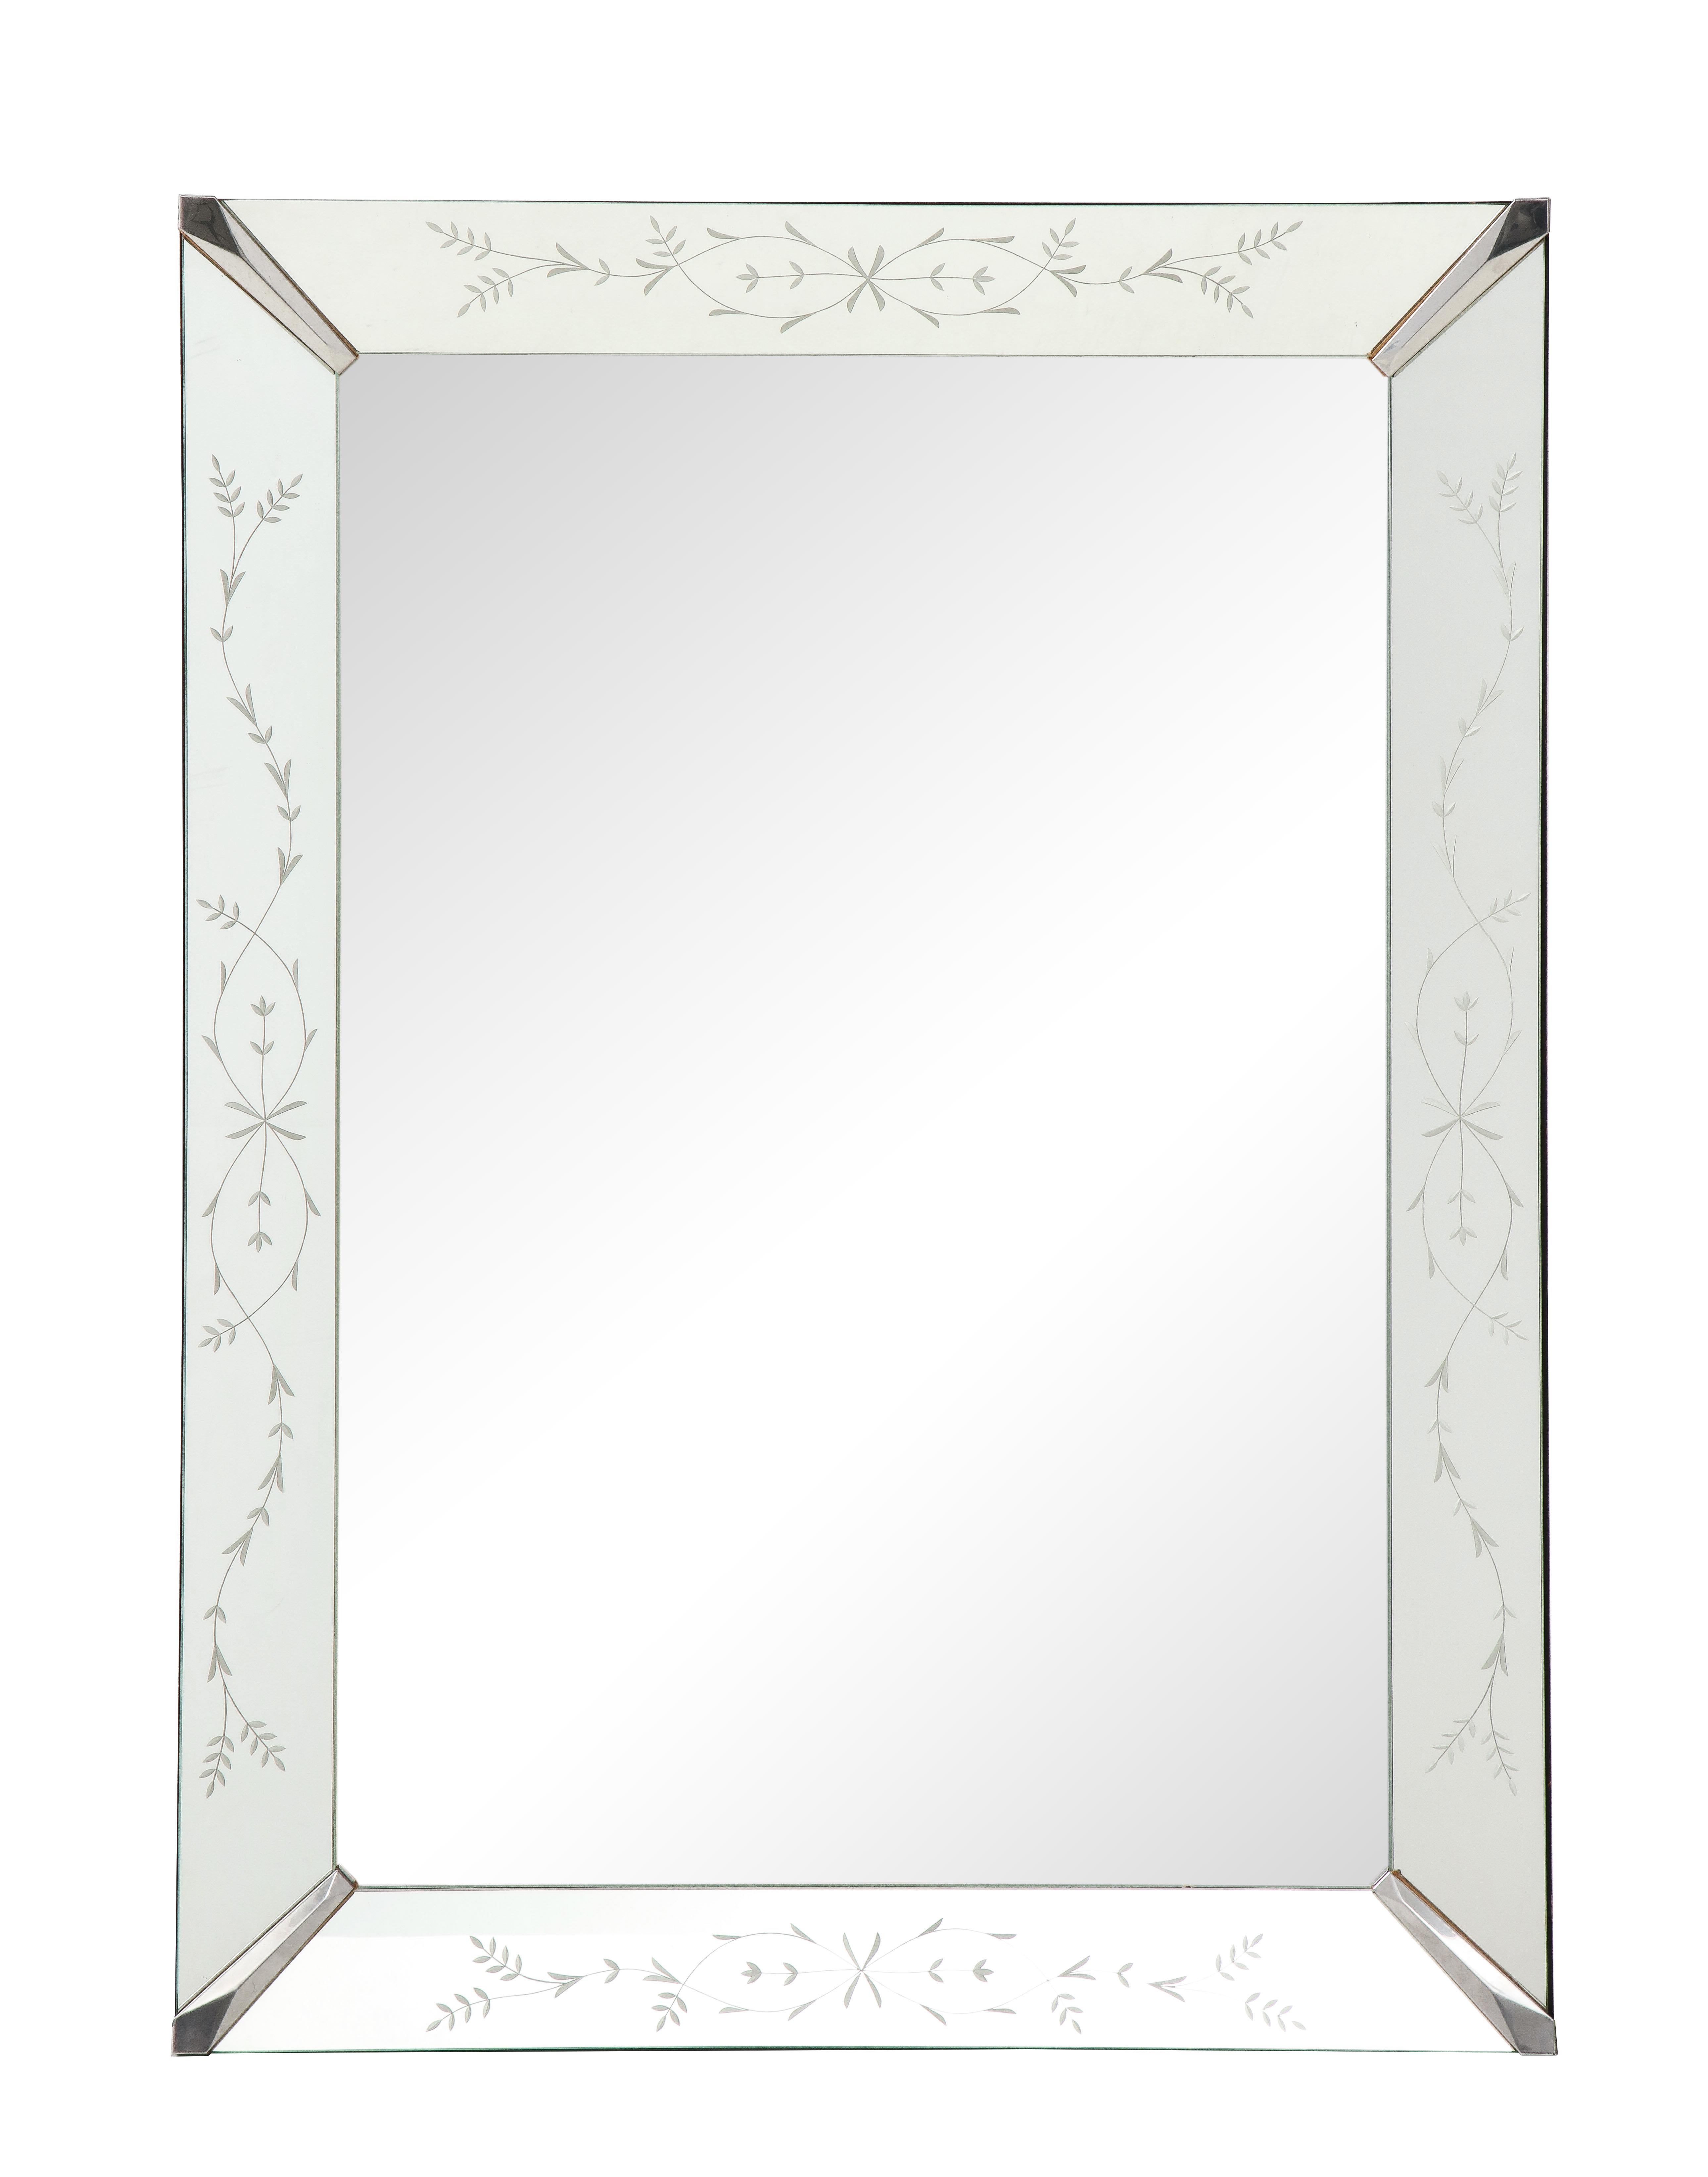 A wonderful etched glass mirror with floral motif is simple in design and elegant in style. Four nickel plated corners angle the etched mirrored frame securely.